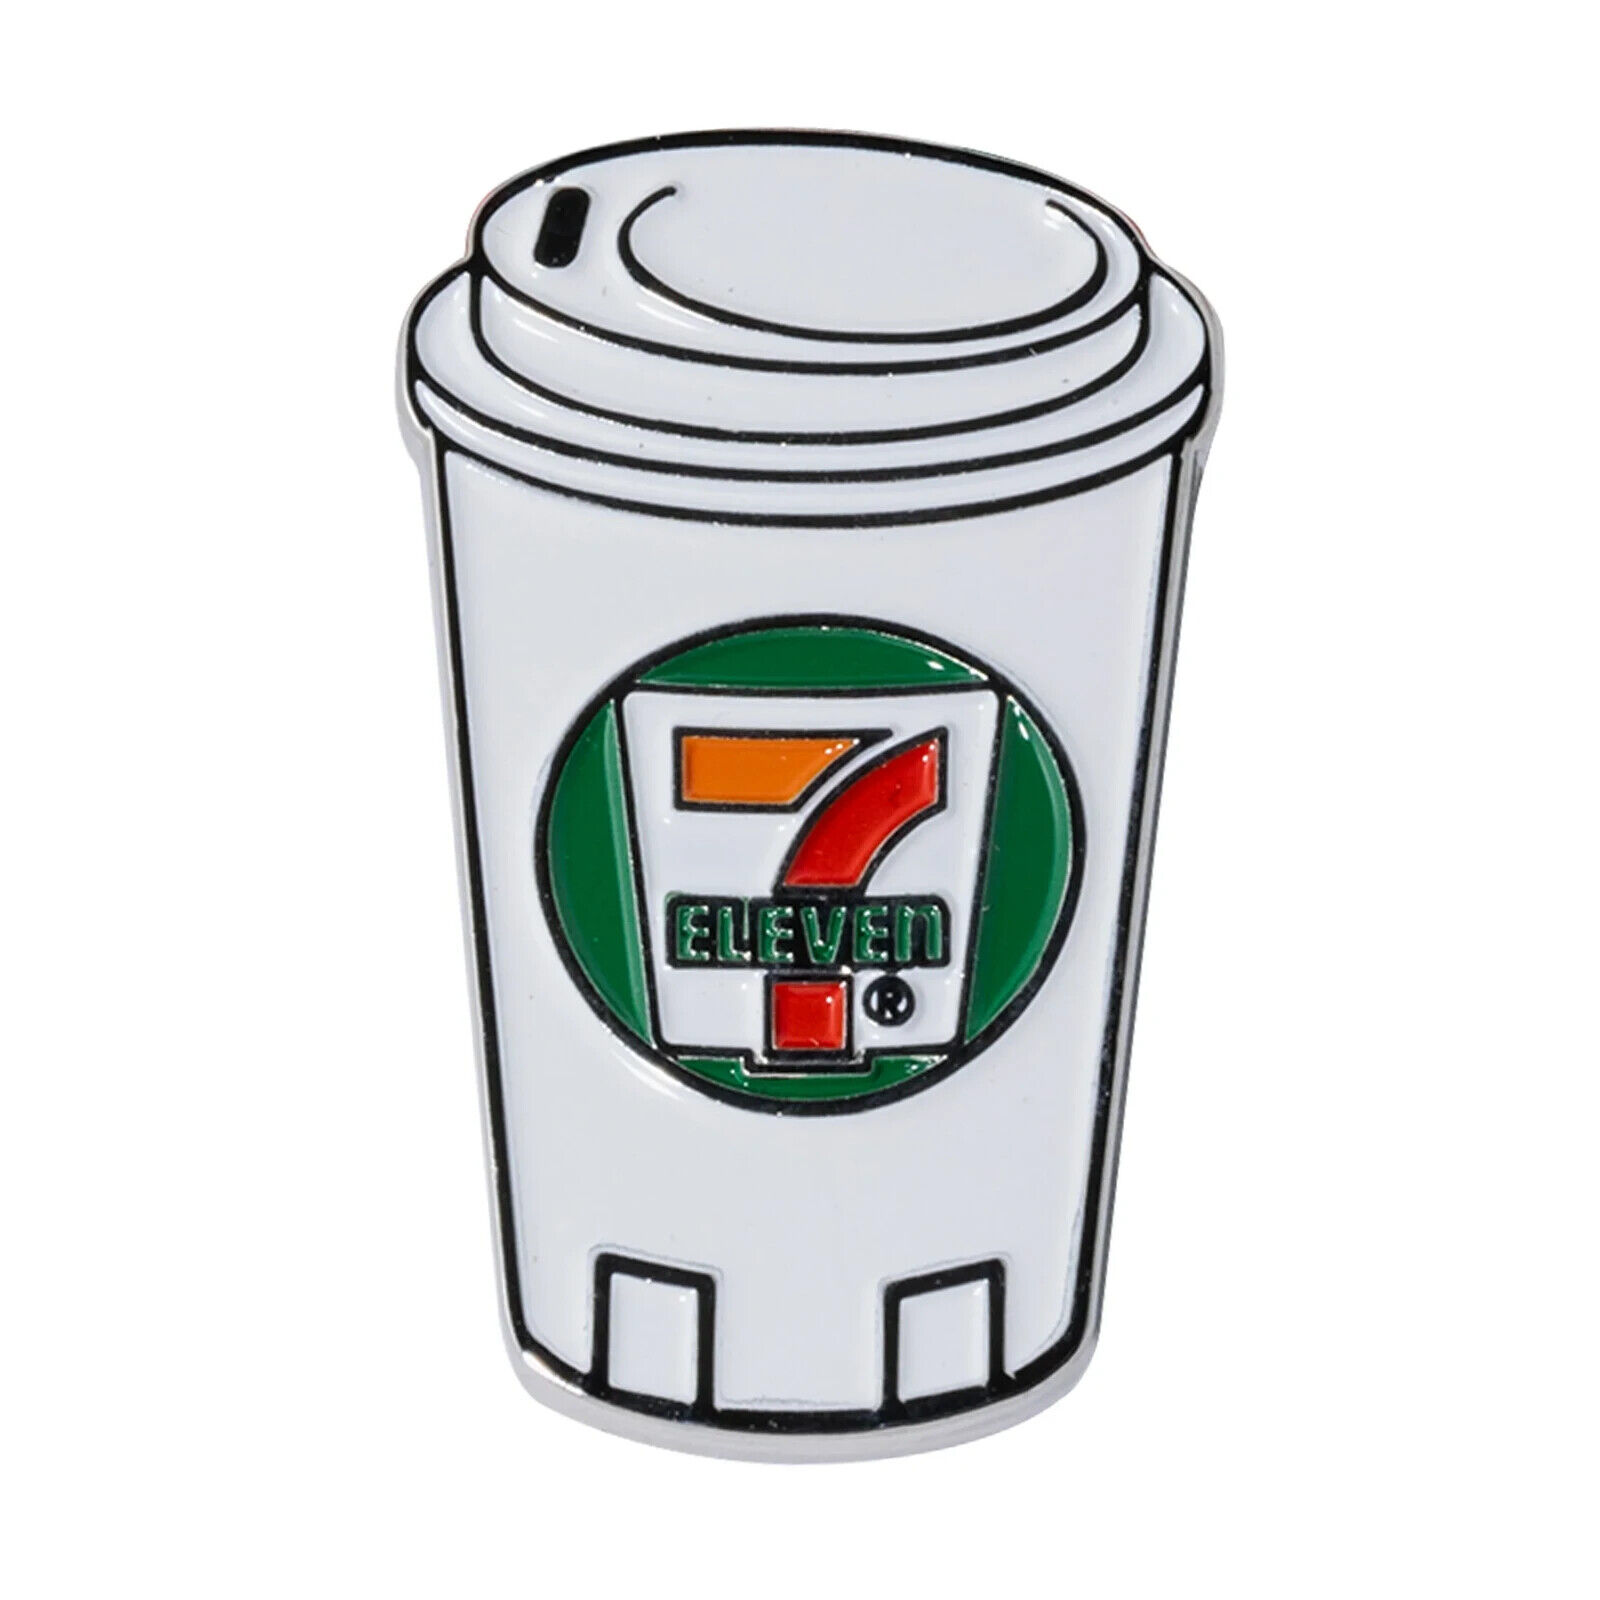 7-Eleven Stores - 7-11 To-Go-Coffee Enamel Pin - Collectible - NEW